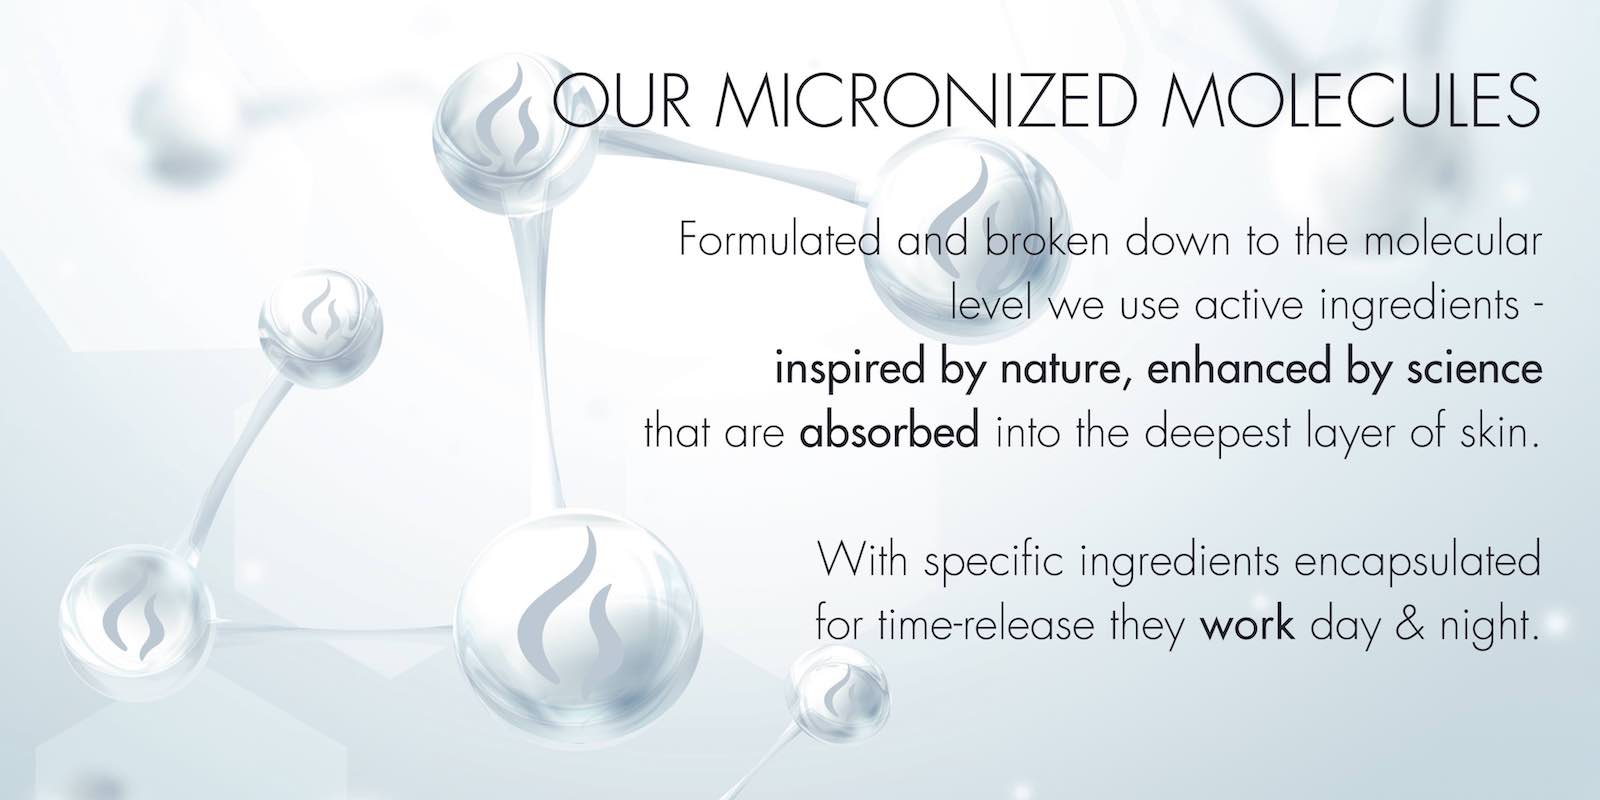 formulated and broken down to the molecular level we use active ingredients -- inspired by nature, enhanced by science, that are absorbed into the deepest layer of skin.